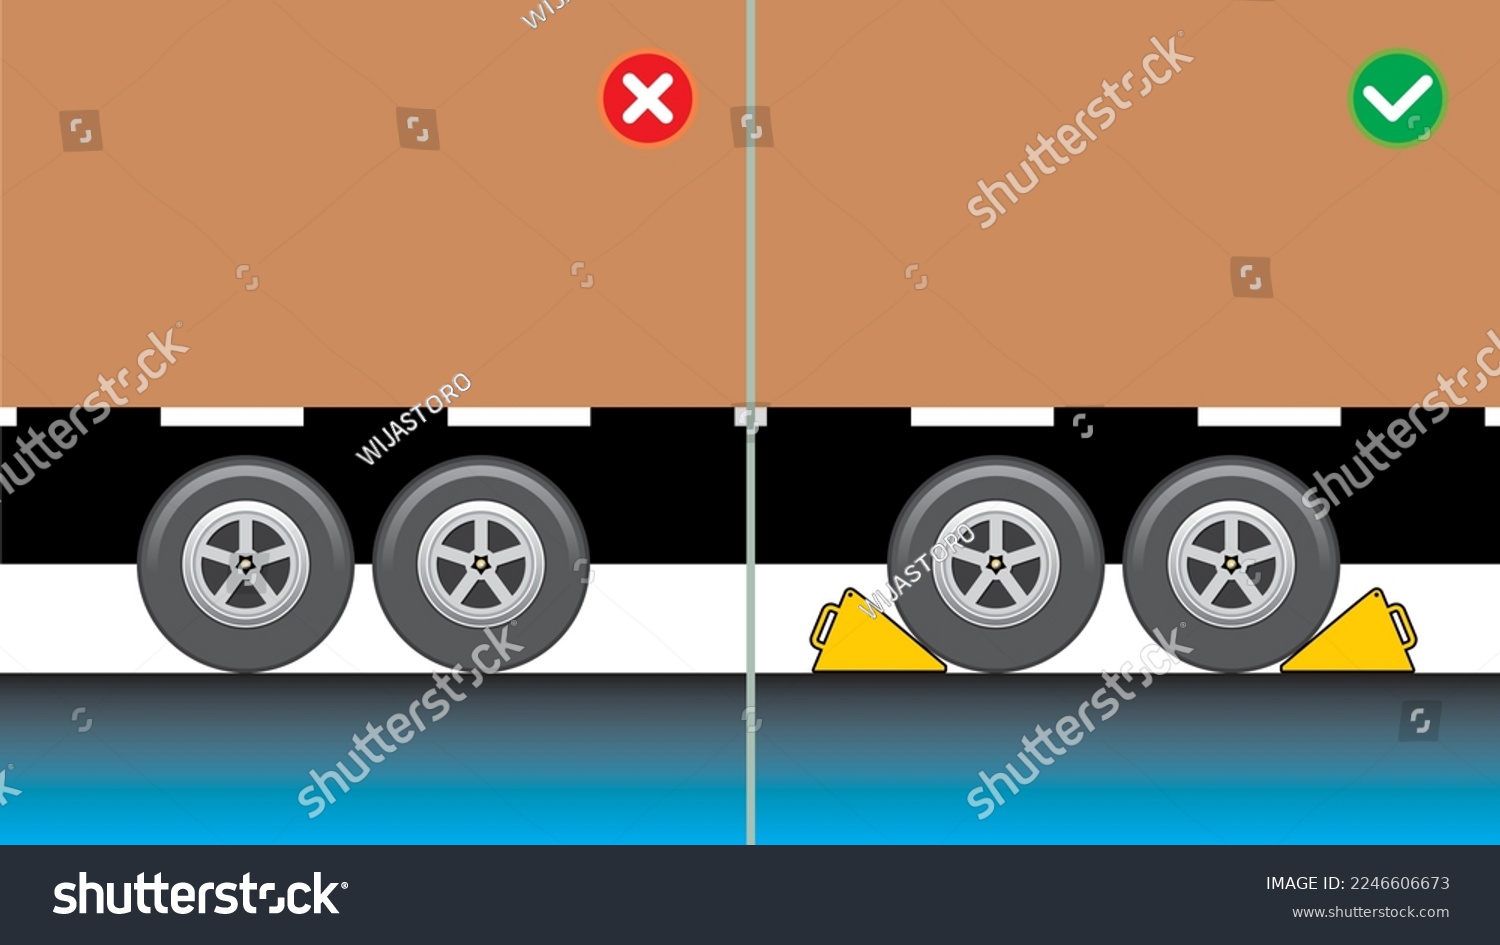 SVG of Do's and dont's vector safety illustration. Truck tire without wheel chocks. Unsafe work condition. No prevention for accidental movement. svg